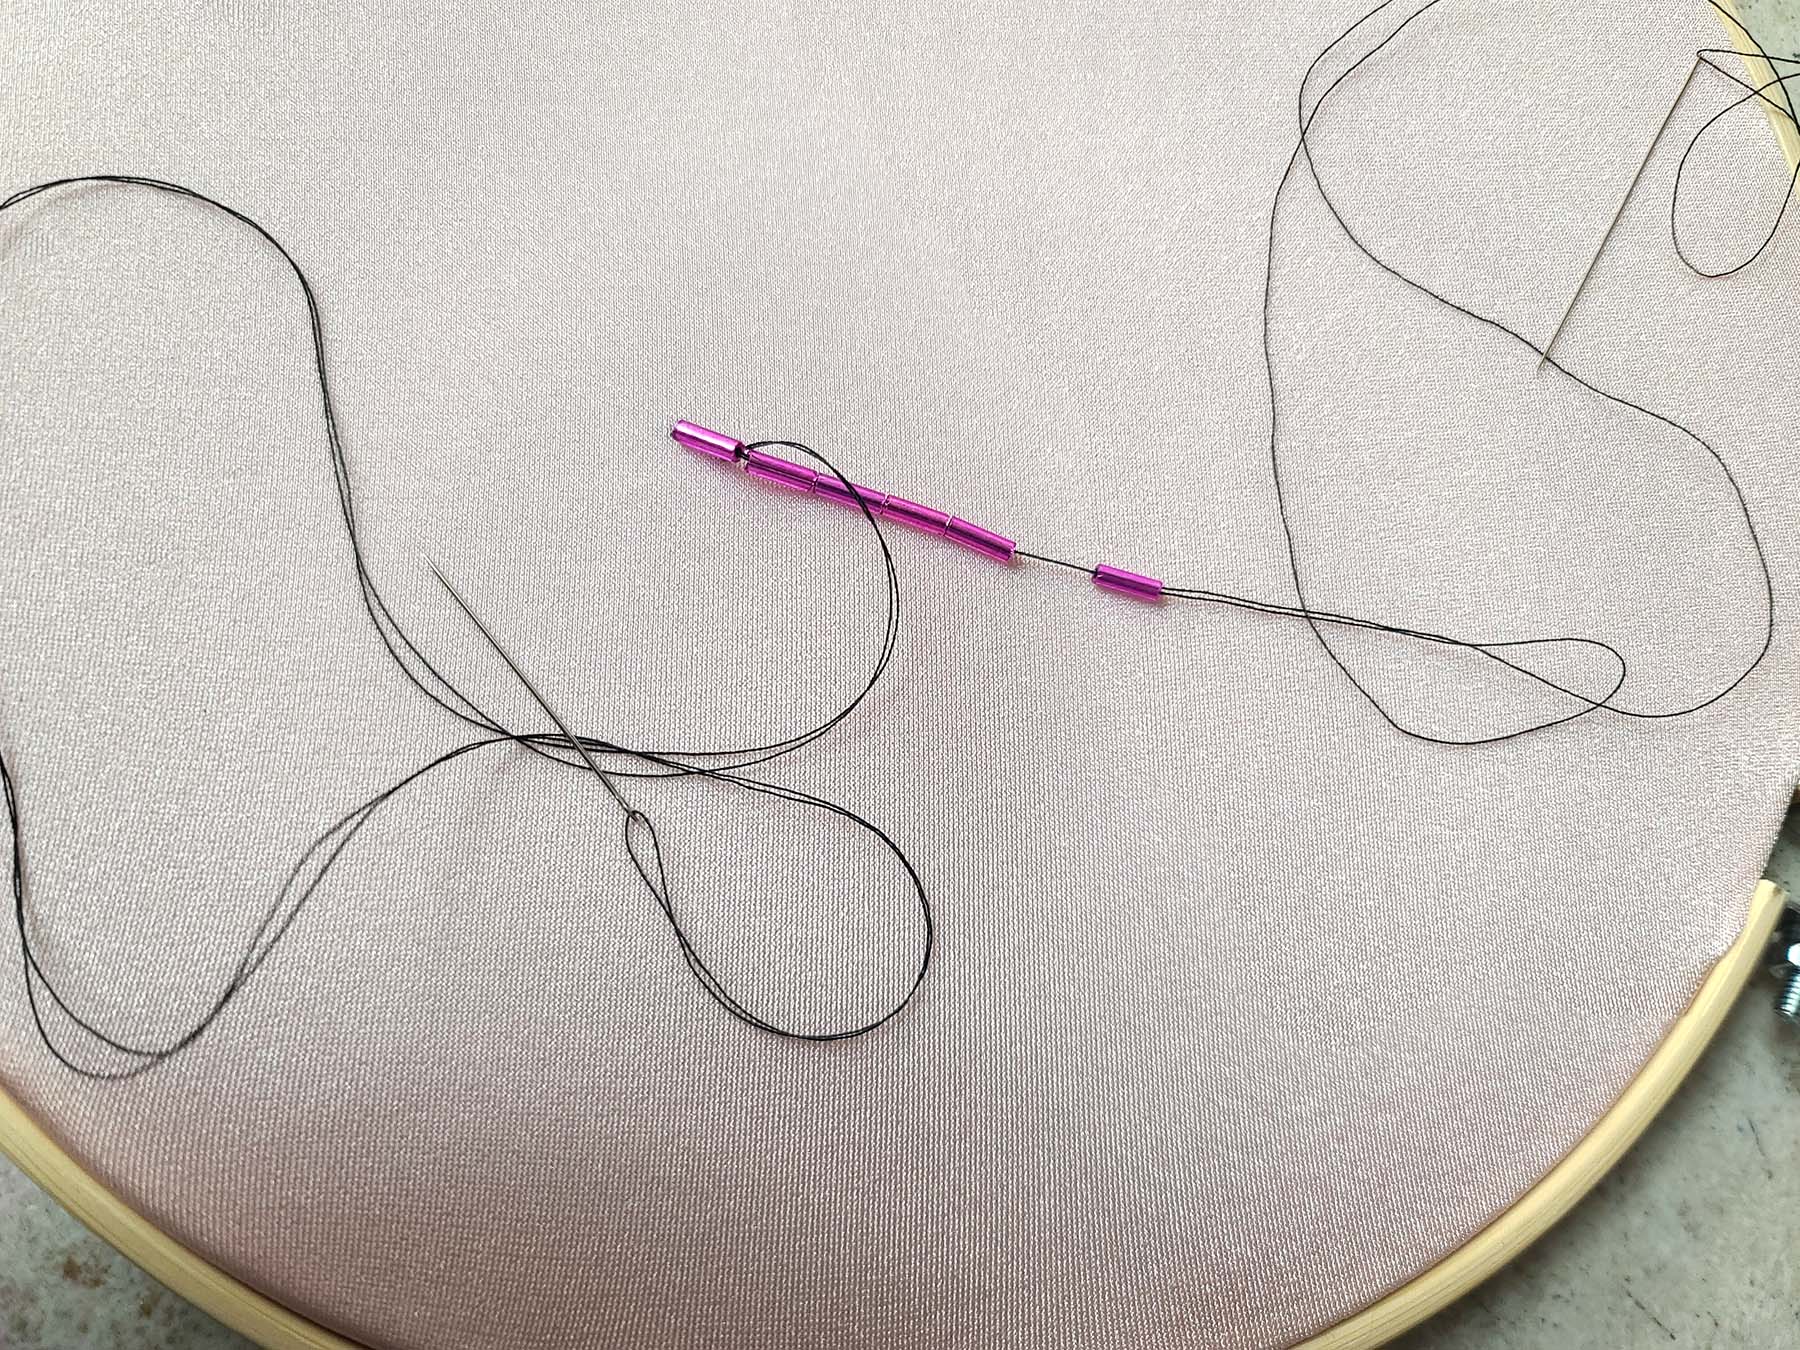 Dark pink bugle beads are threaded onto a black thread, over a light pink spandex. A second needle with black thread is pictured.